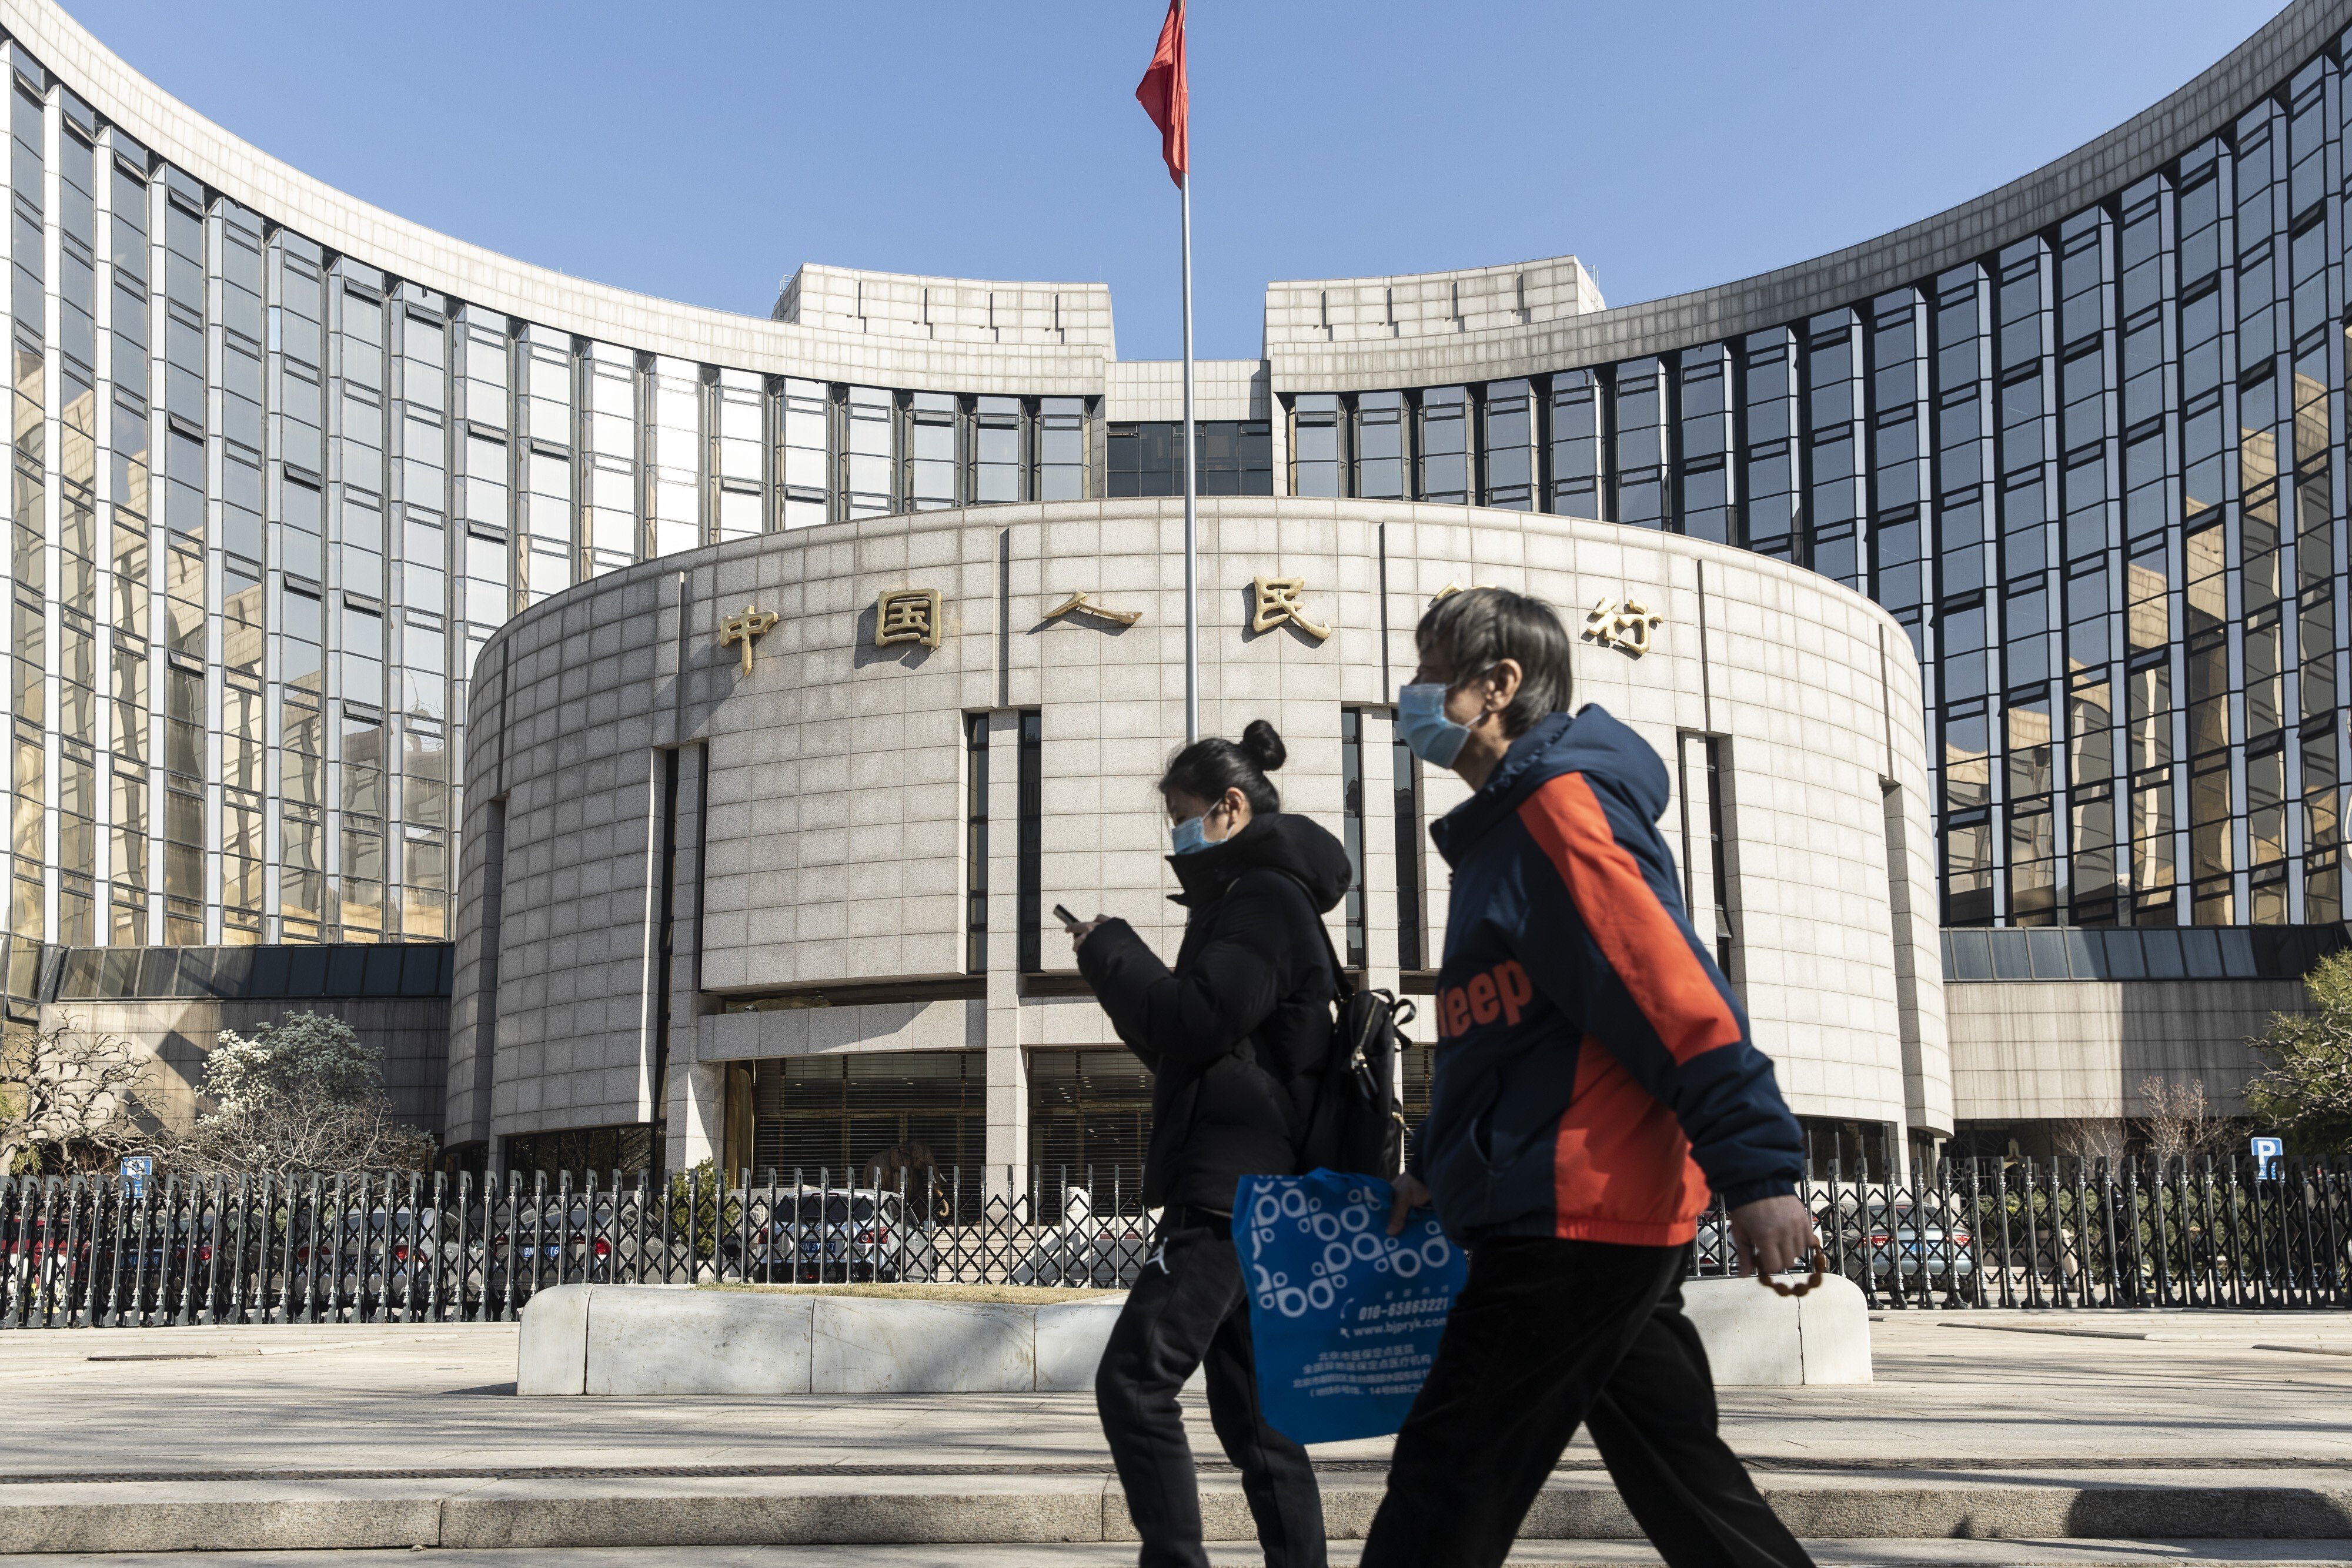 Pedestrians walk past the People's Bank of China headquarters in Beijing on March 17. Photo: Bloomberg